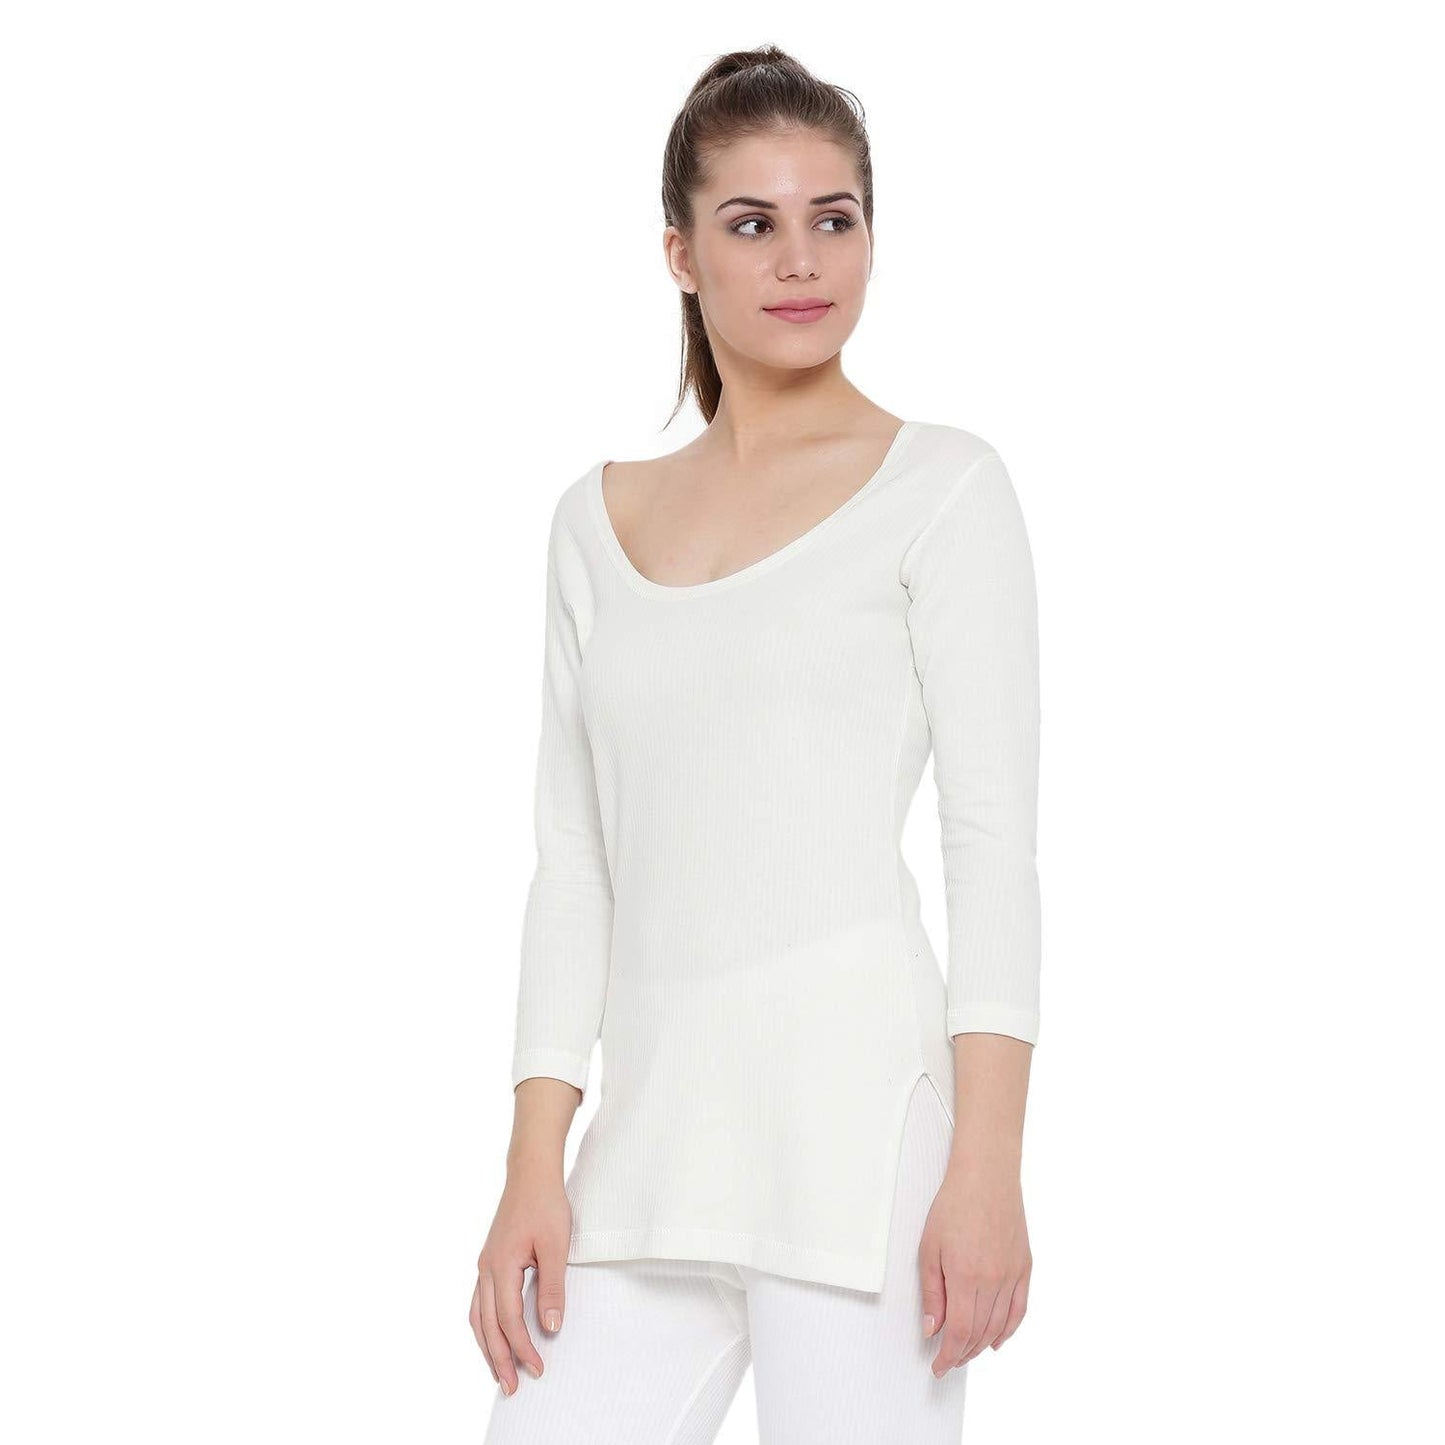 Monte Carlo White Cotton Thermal Warmer Winter Wear Top for Ladies